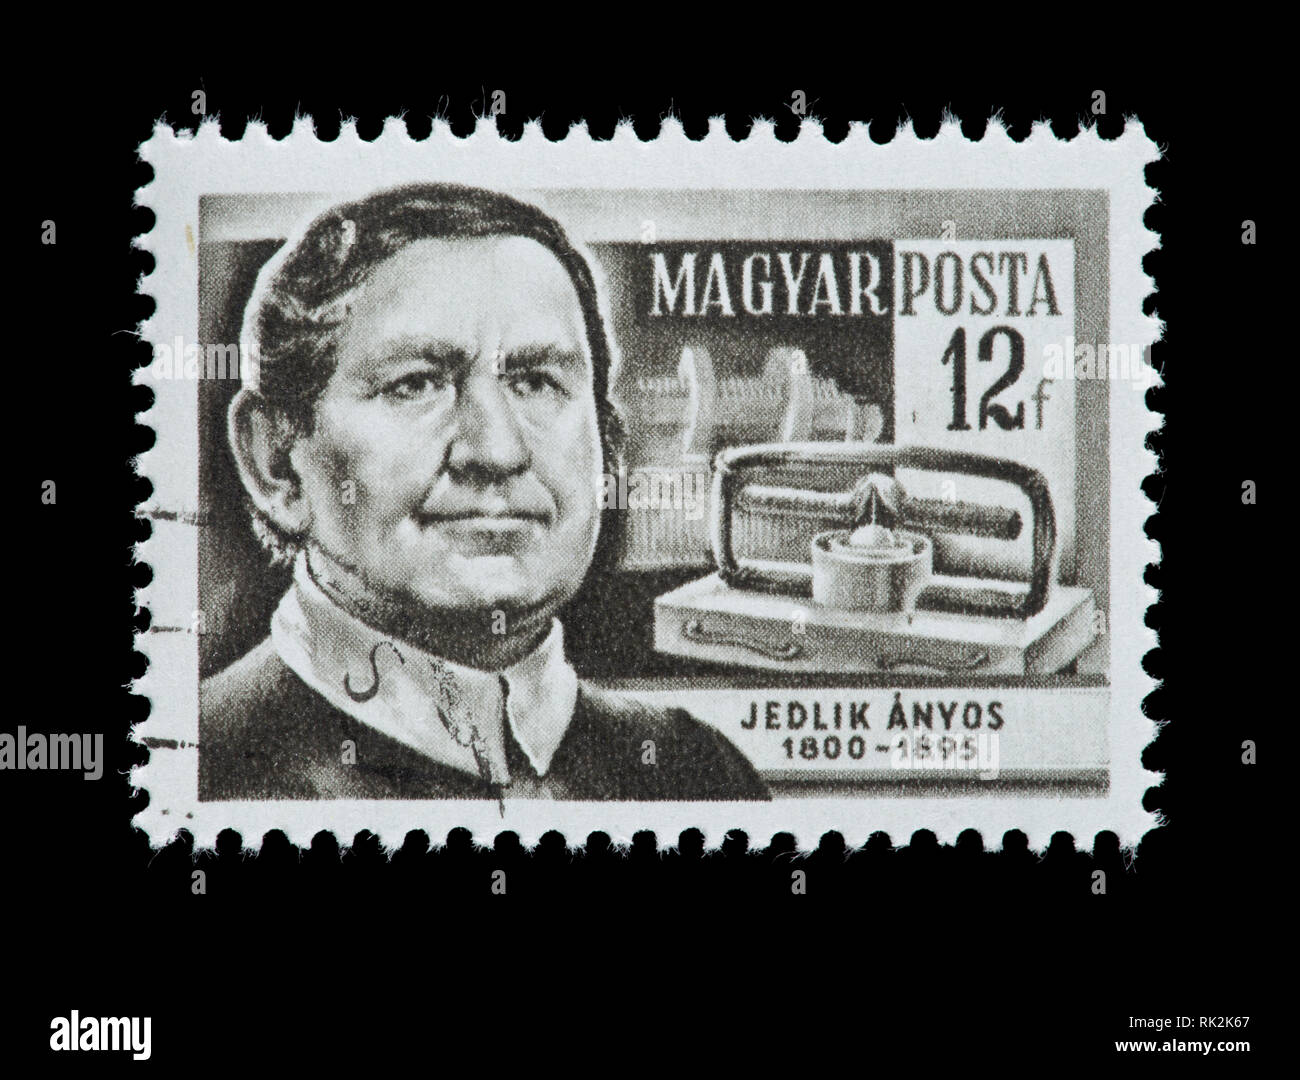 Postage stamp from Hungary depicting Anyos Jedlik, famous scientist. Stock Photo